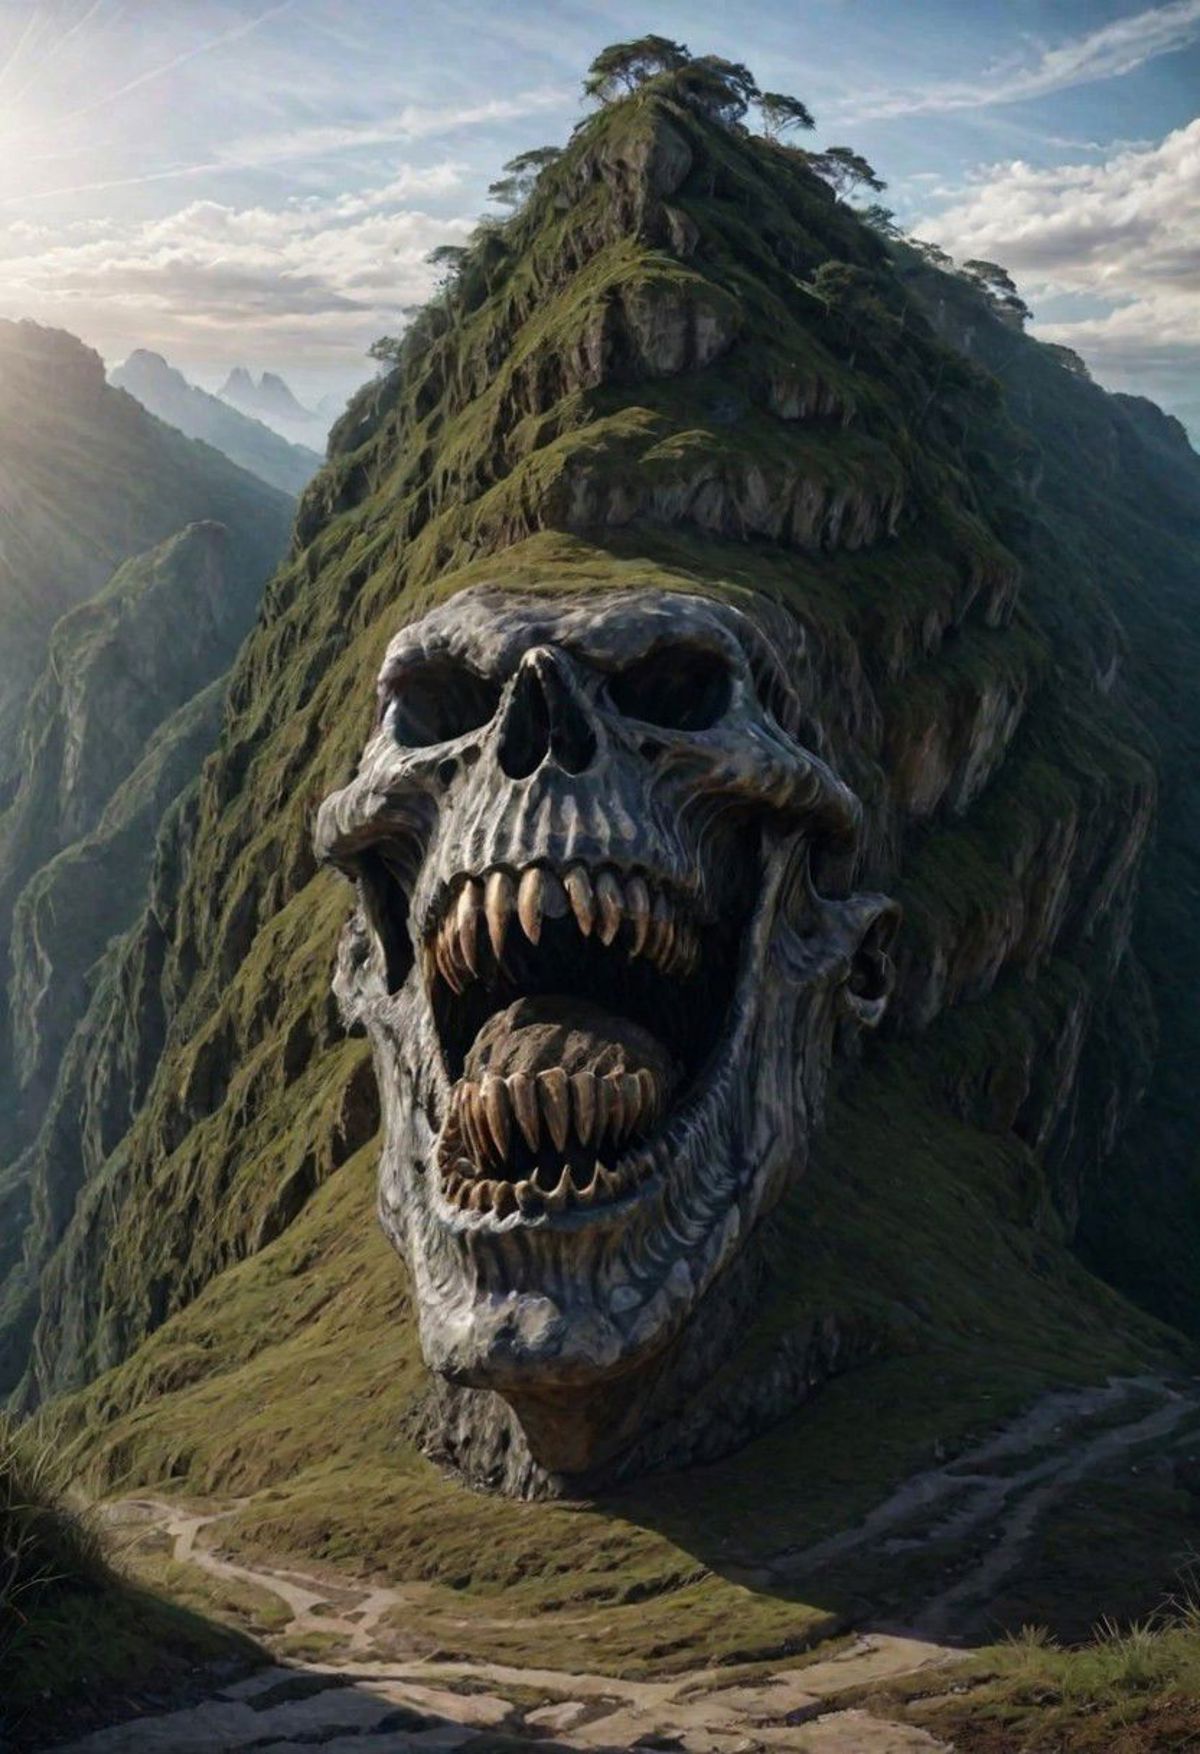 Large Skull with Teeth and Grinning Mouth on a Mountain Side